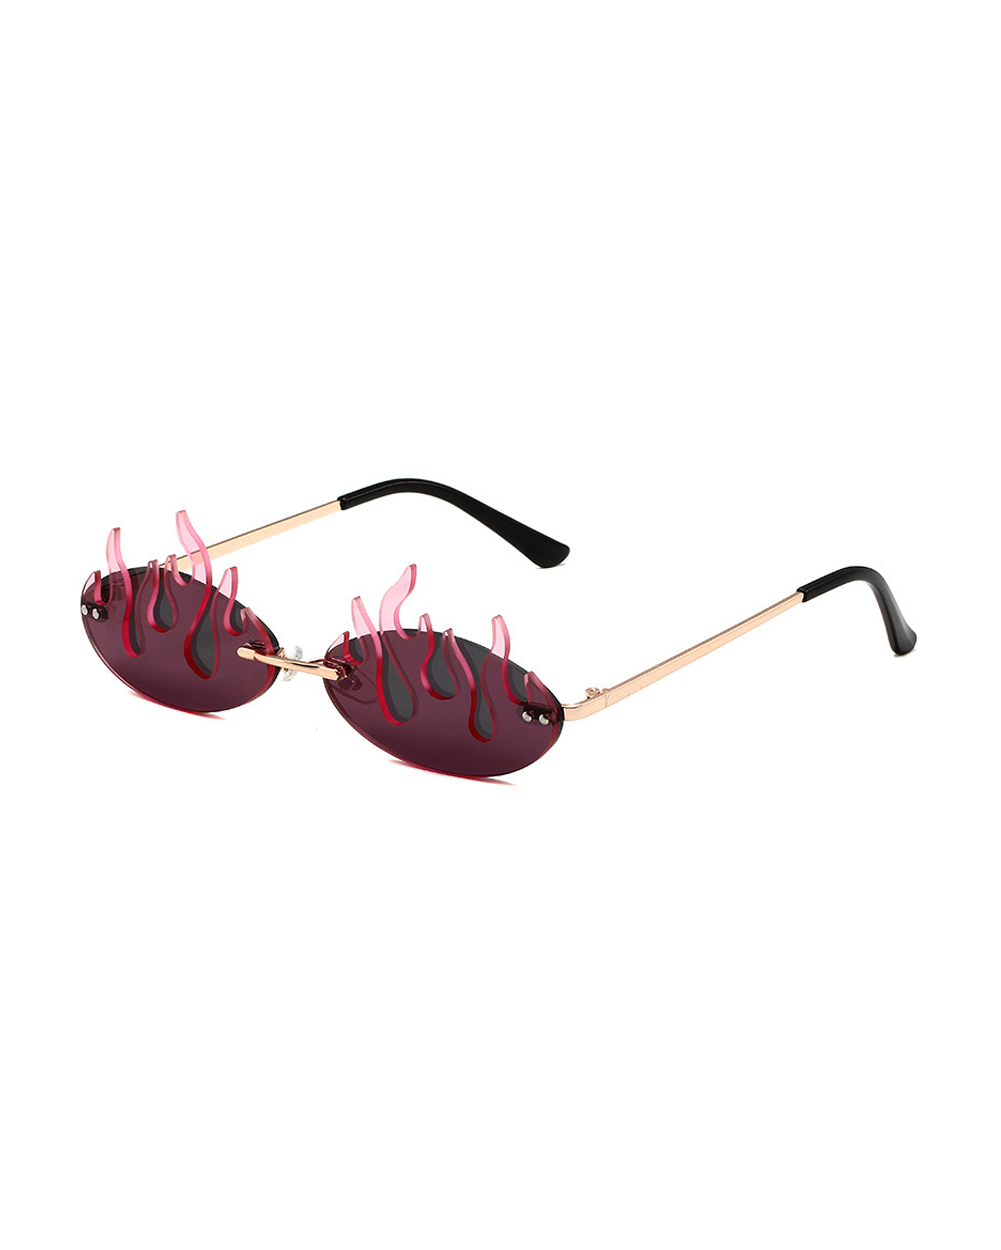 Fuel to the Flame Glasses-Black/Pink-Side